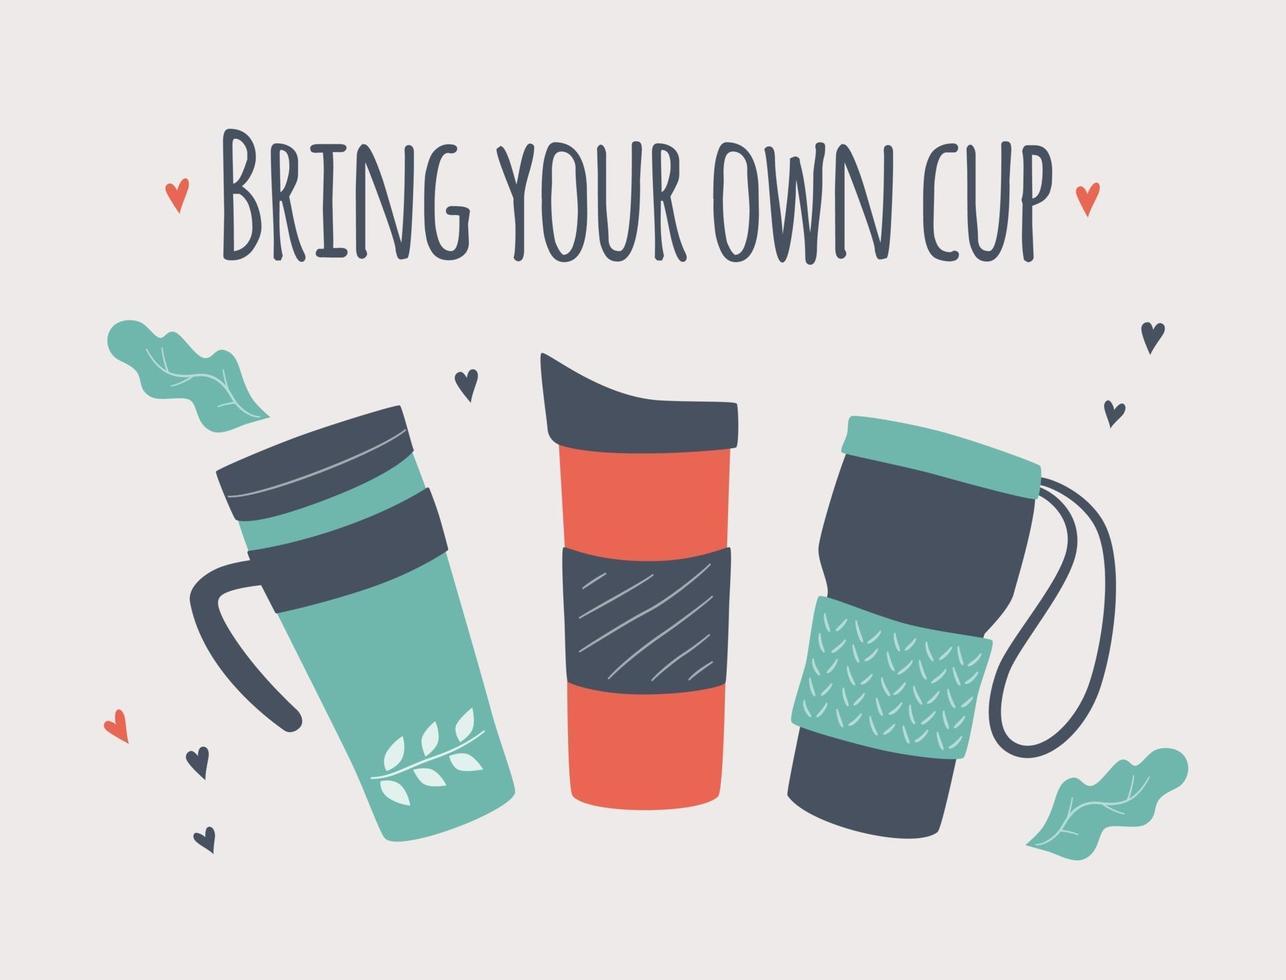 Bring your own cup. BYOC. Hand drawn reusable coffee to go mug vector